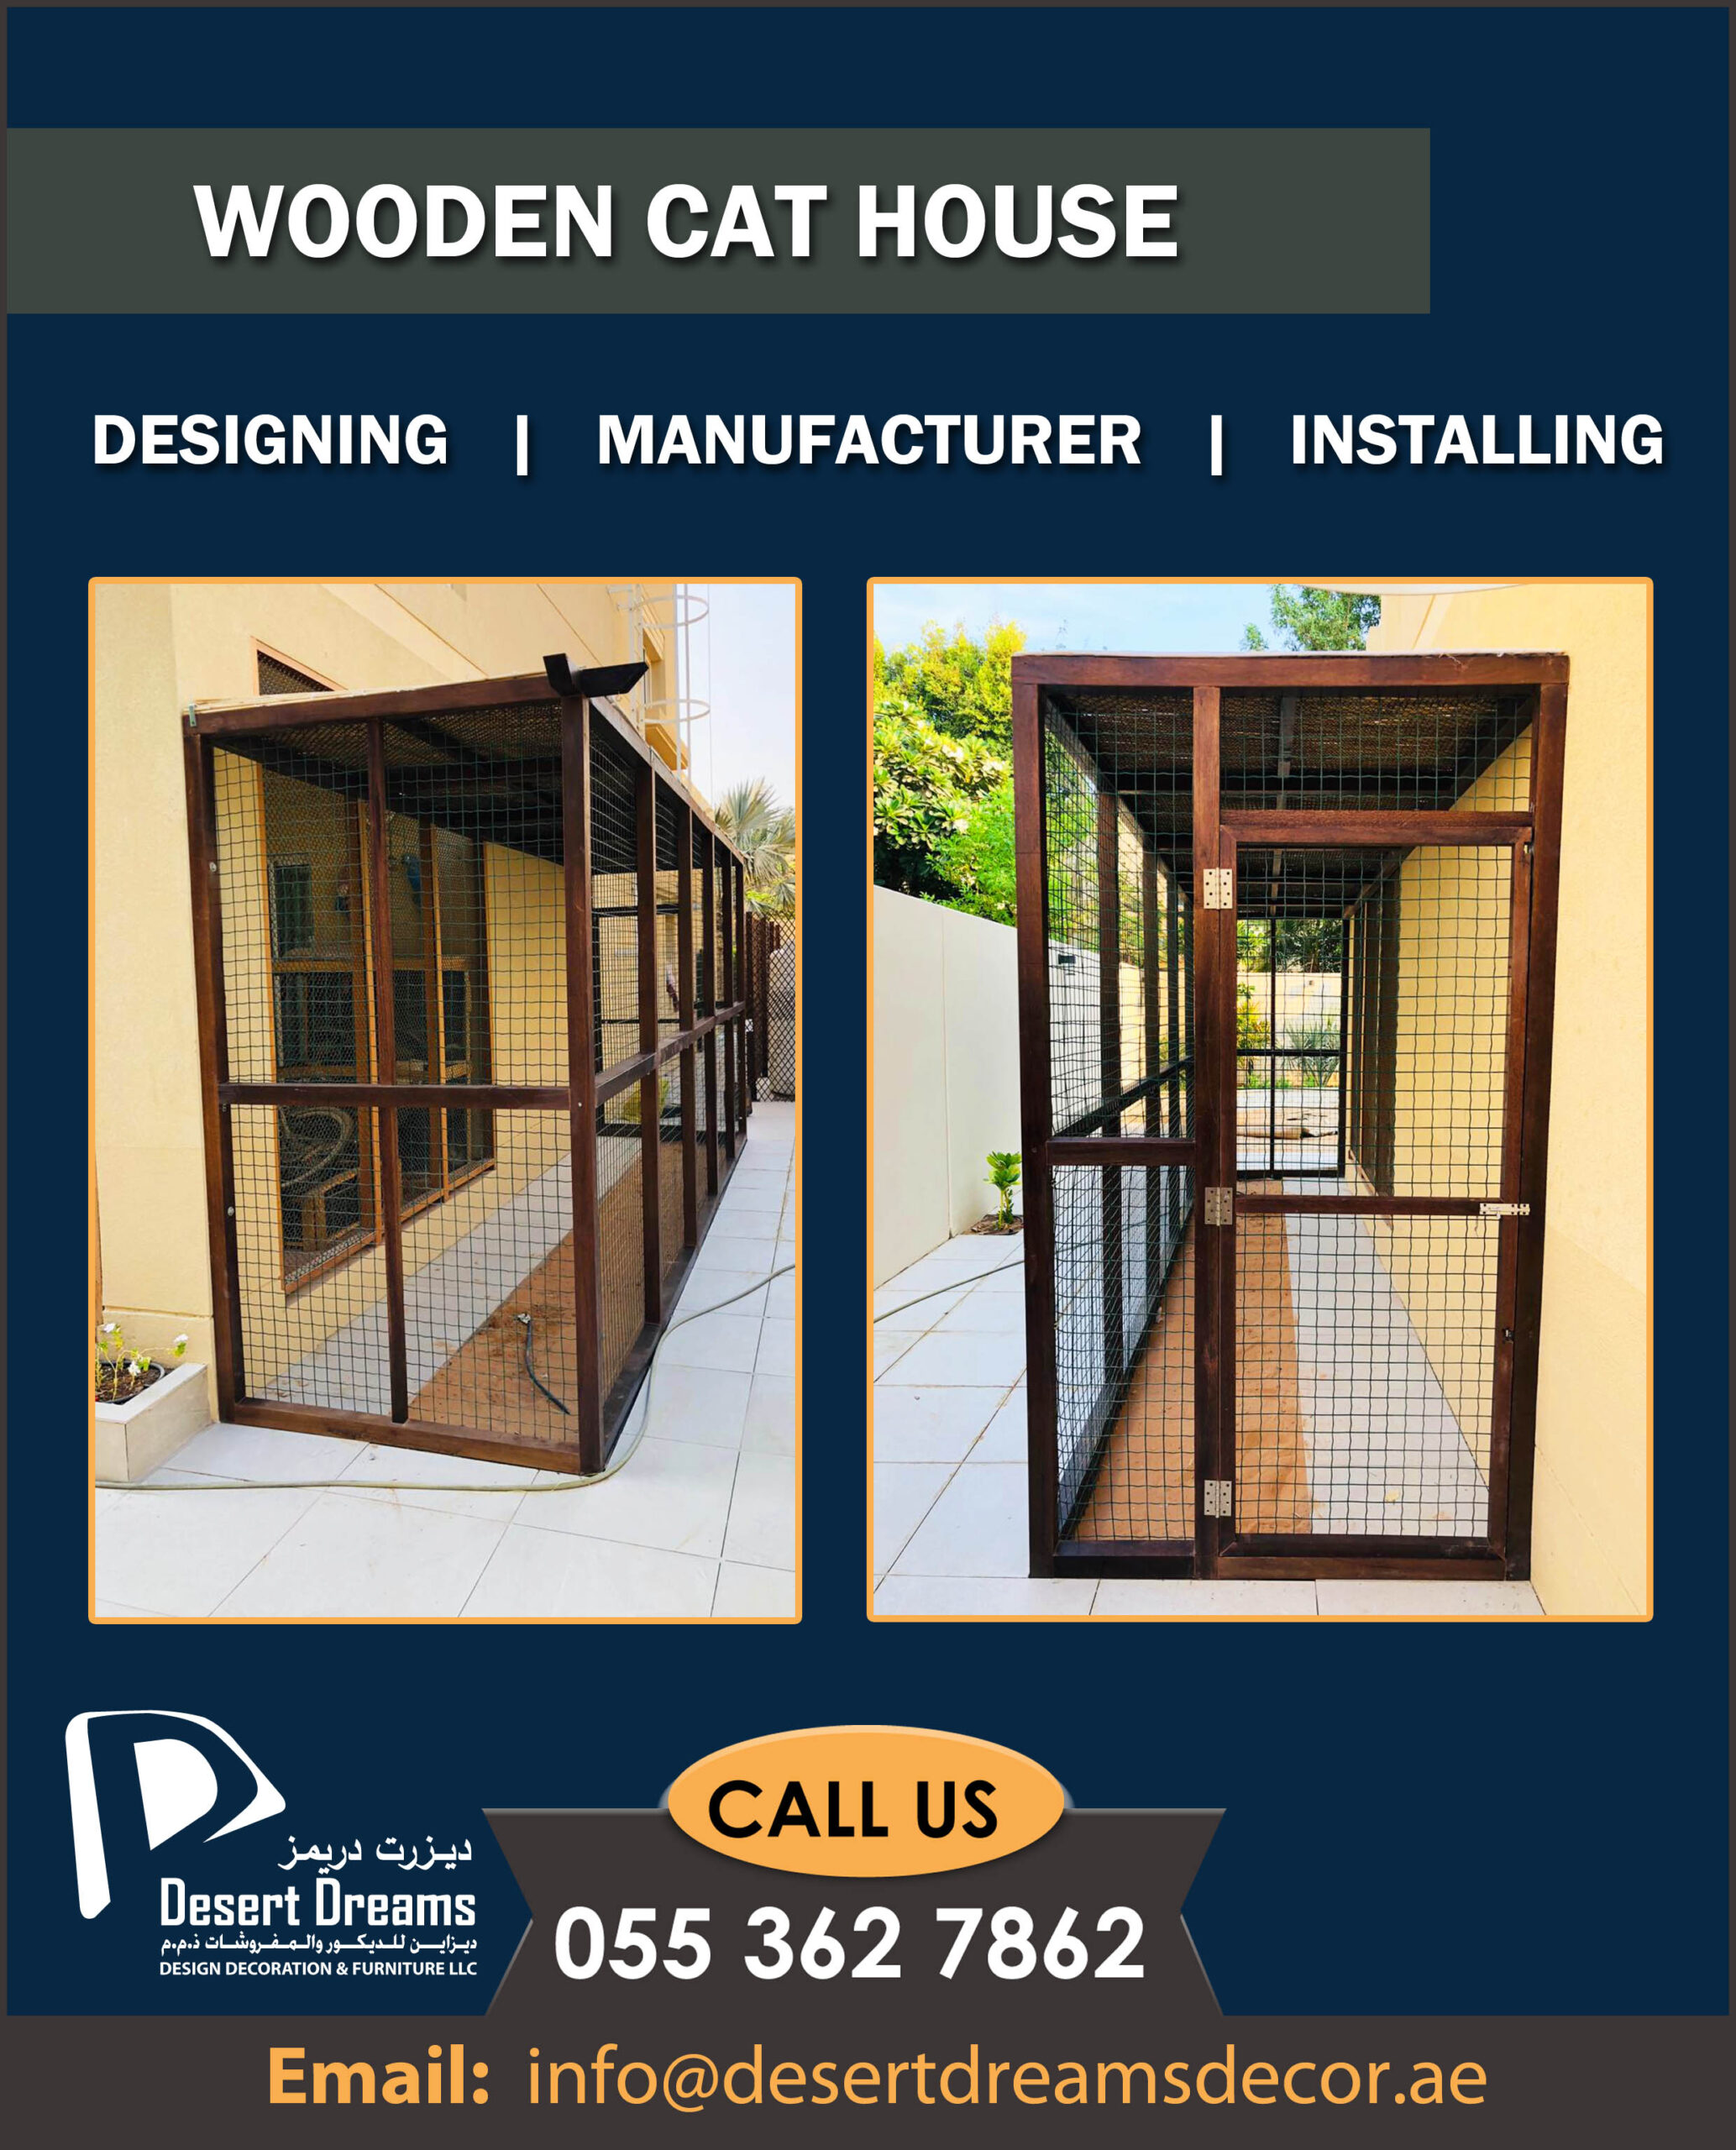 Wooden Dog House Suppliers | Wooden Cat House Suppliers in Uae.